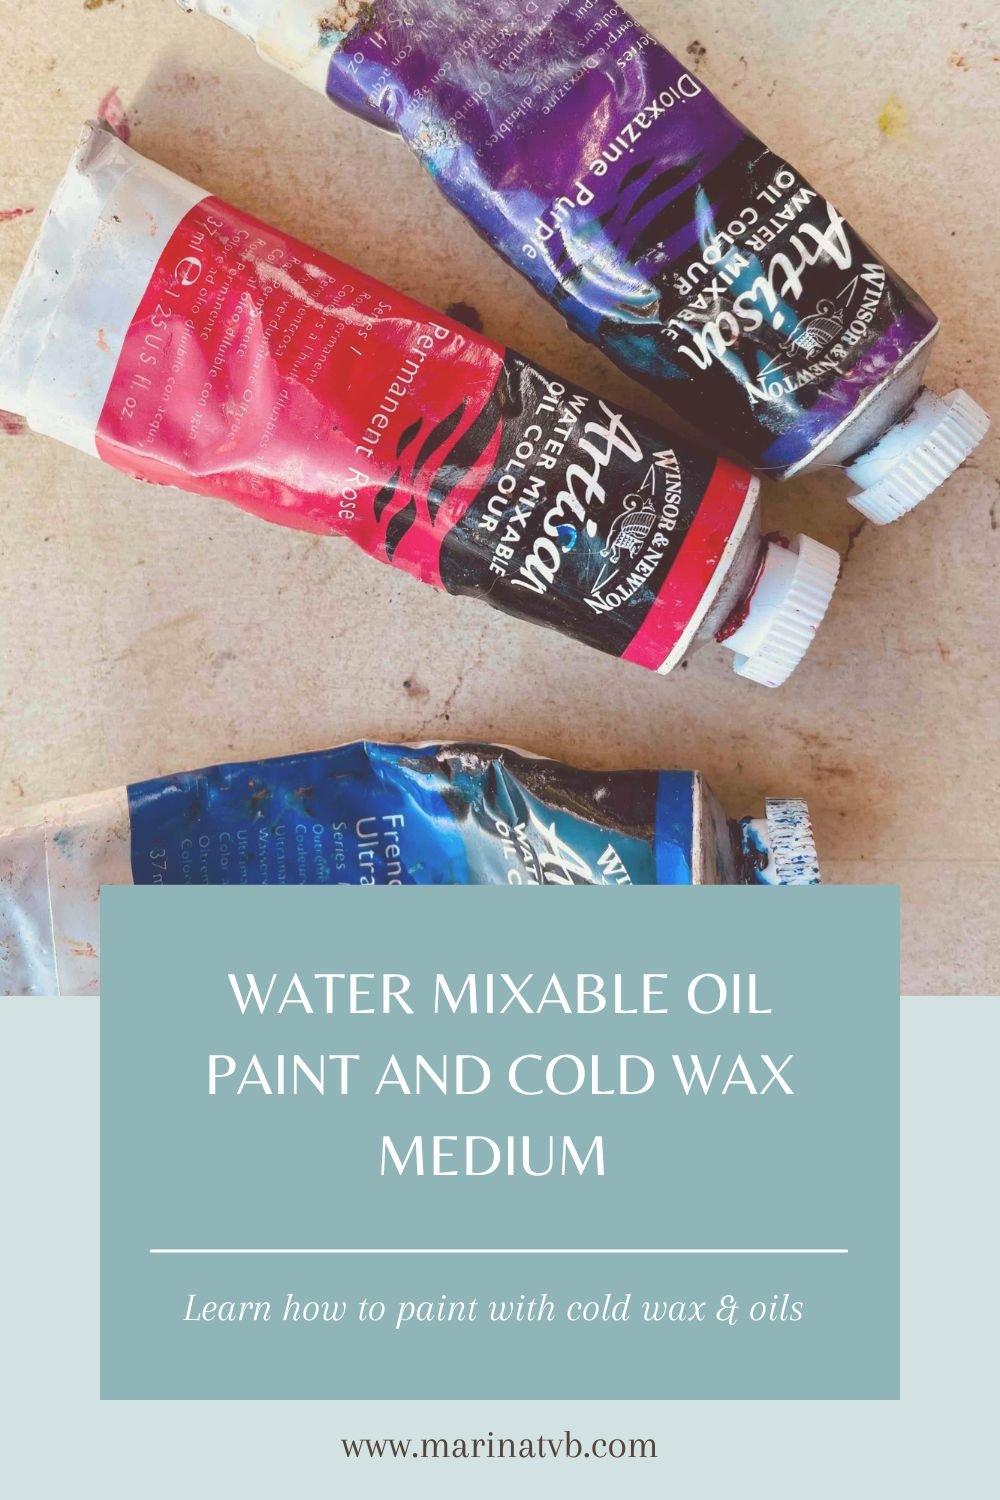 Water-Mixable Oil Colour: Everything You Need to Know! - Artsavingsclub Blog